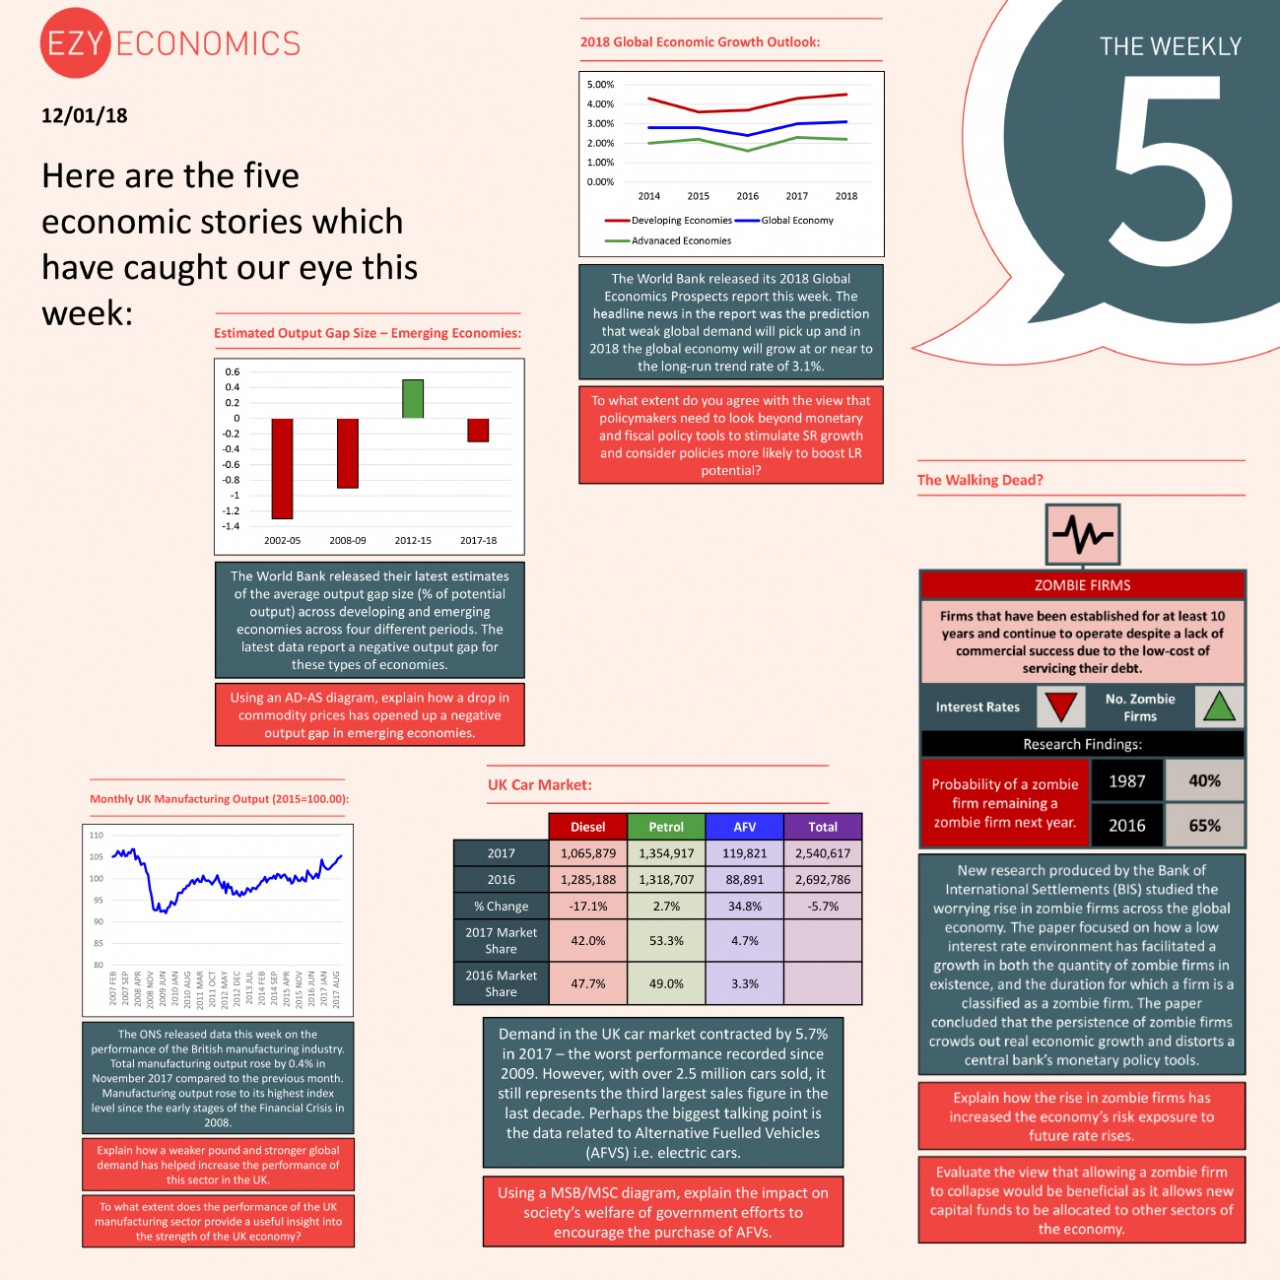 The Economics Weekly 5 - 12th January 2018